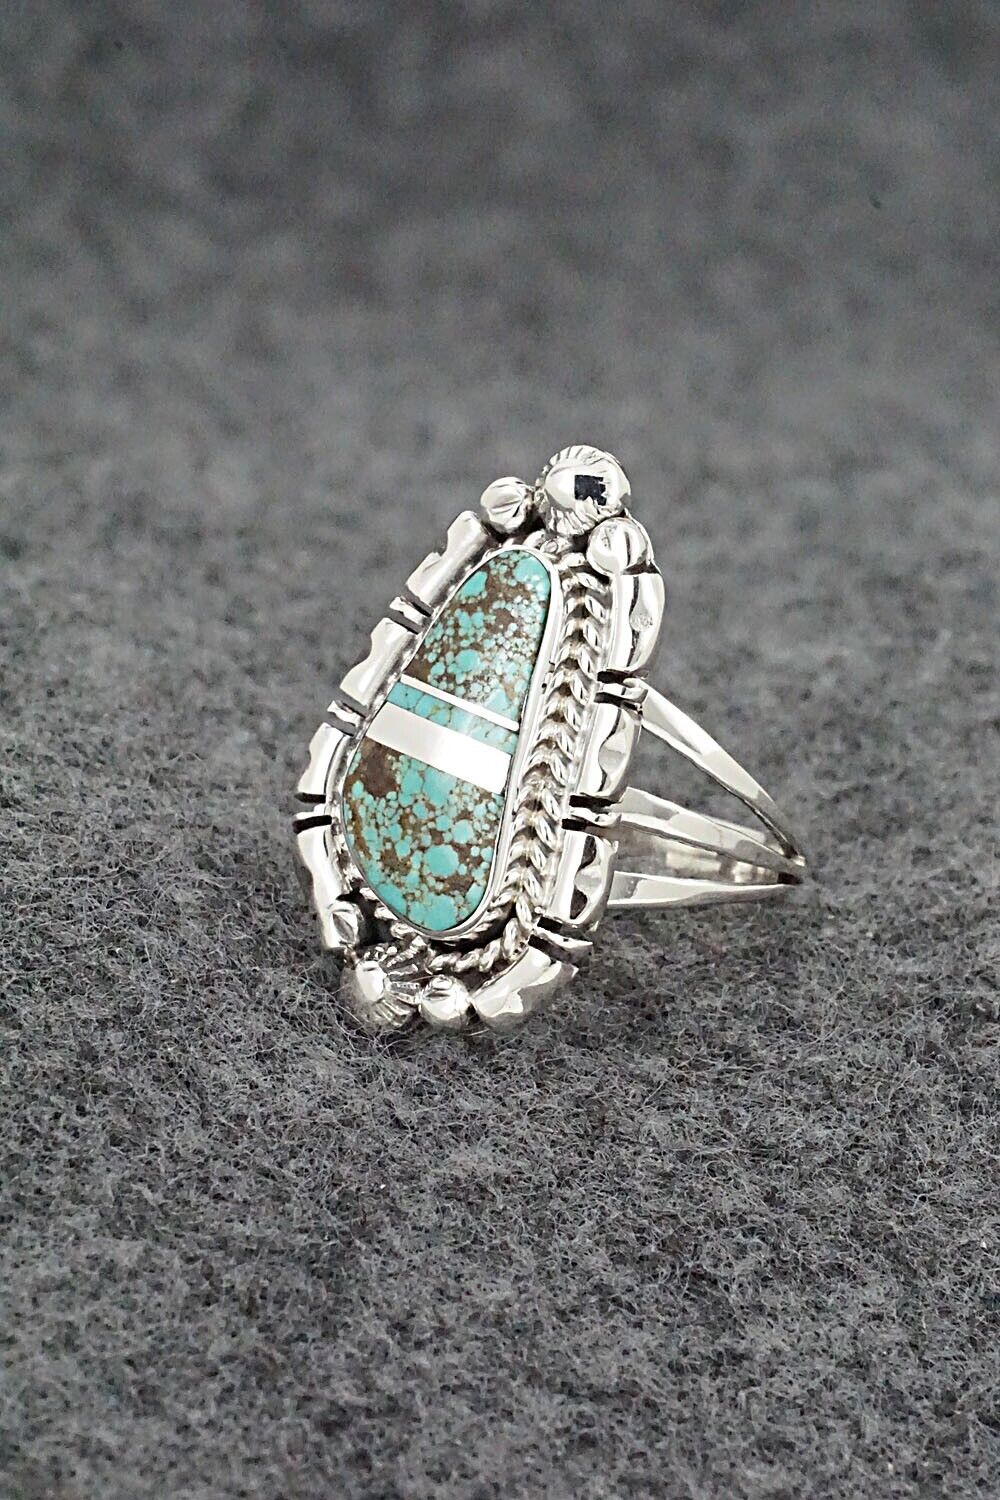 Turquoise & Sterling Silver Ring - James Manygoats - Size 6.25